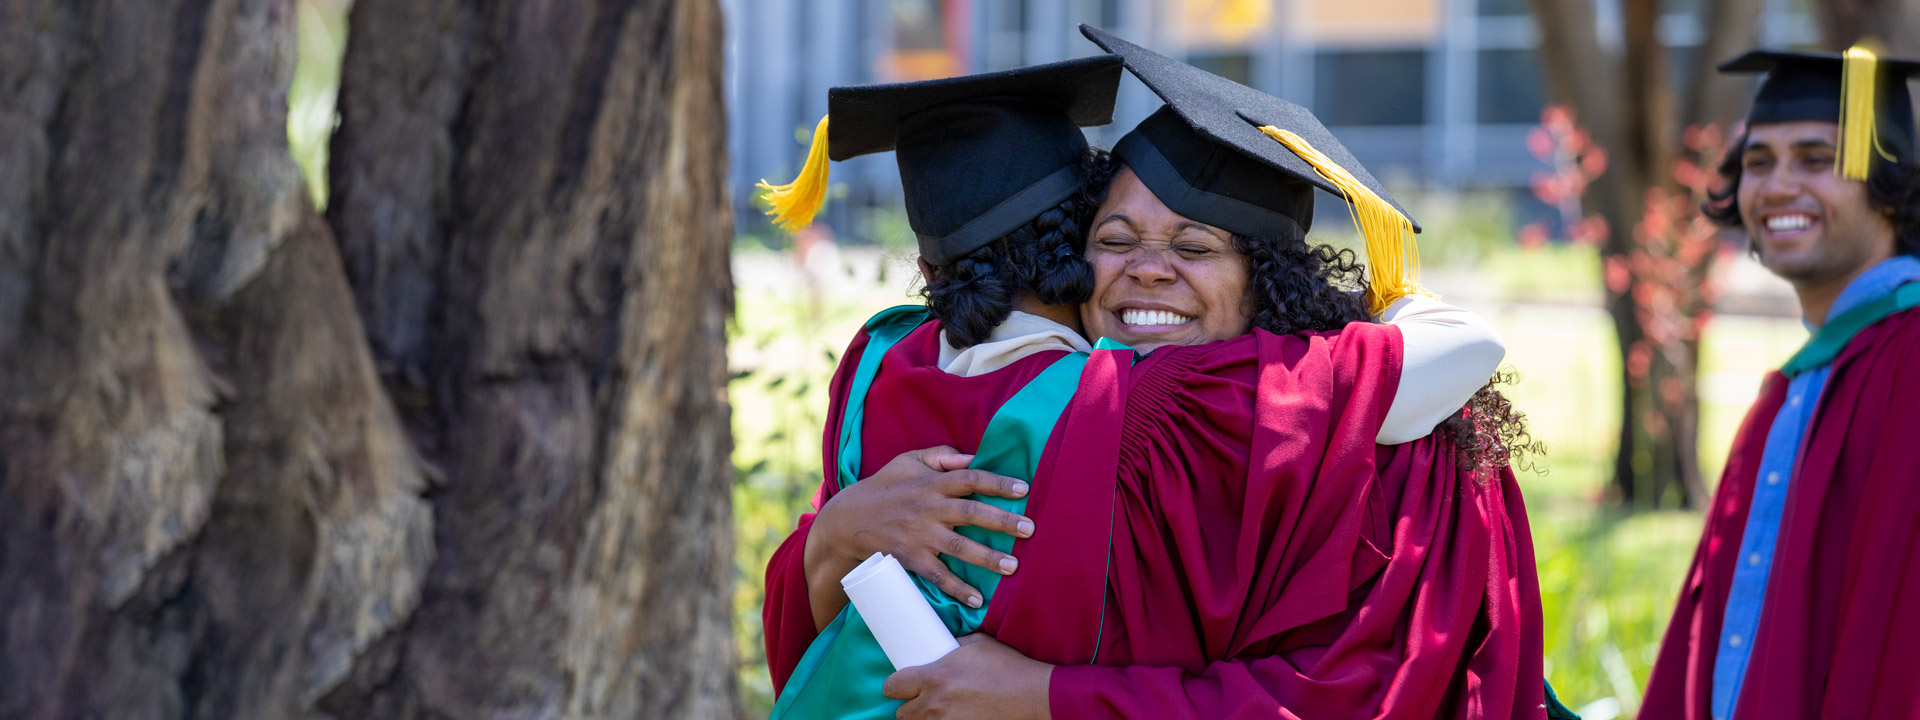 Two students smiling while hugging each other on graduation day. They are wearing their graduation robes and standing outdoors, next to a tree.